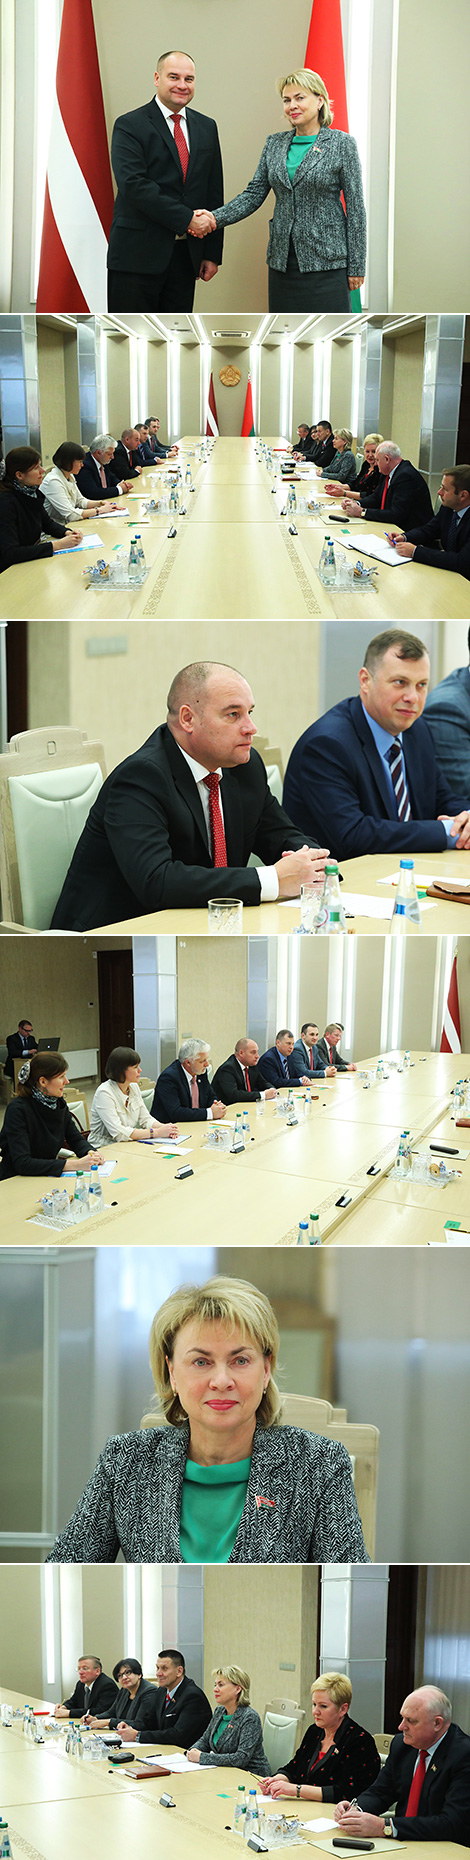 MPs of Belarus, Latvia discuss prospects of economic relations in Minsk